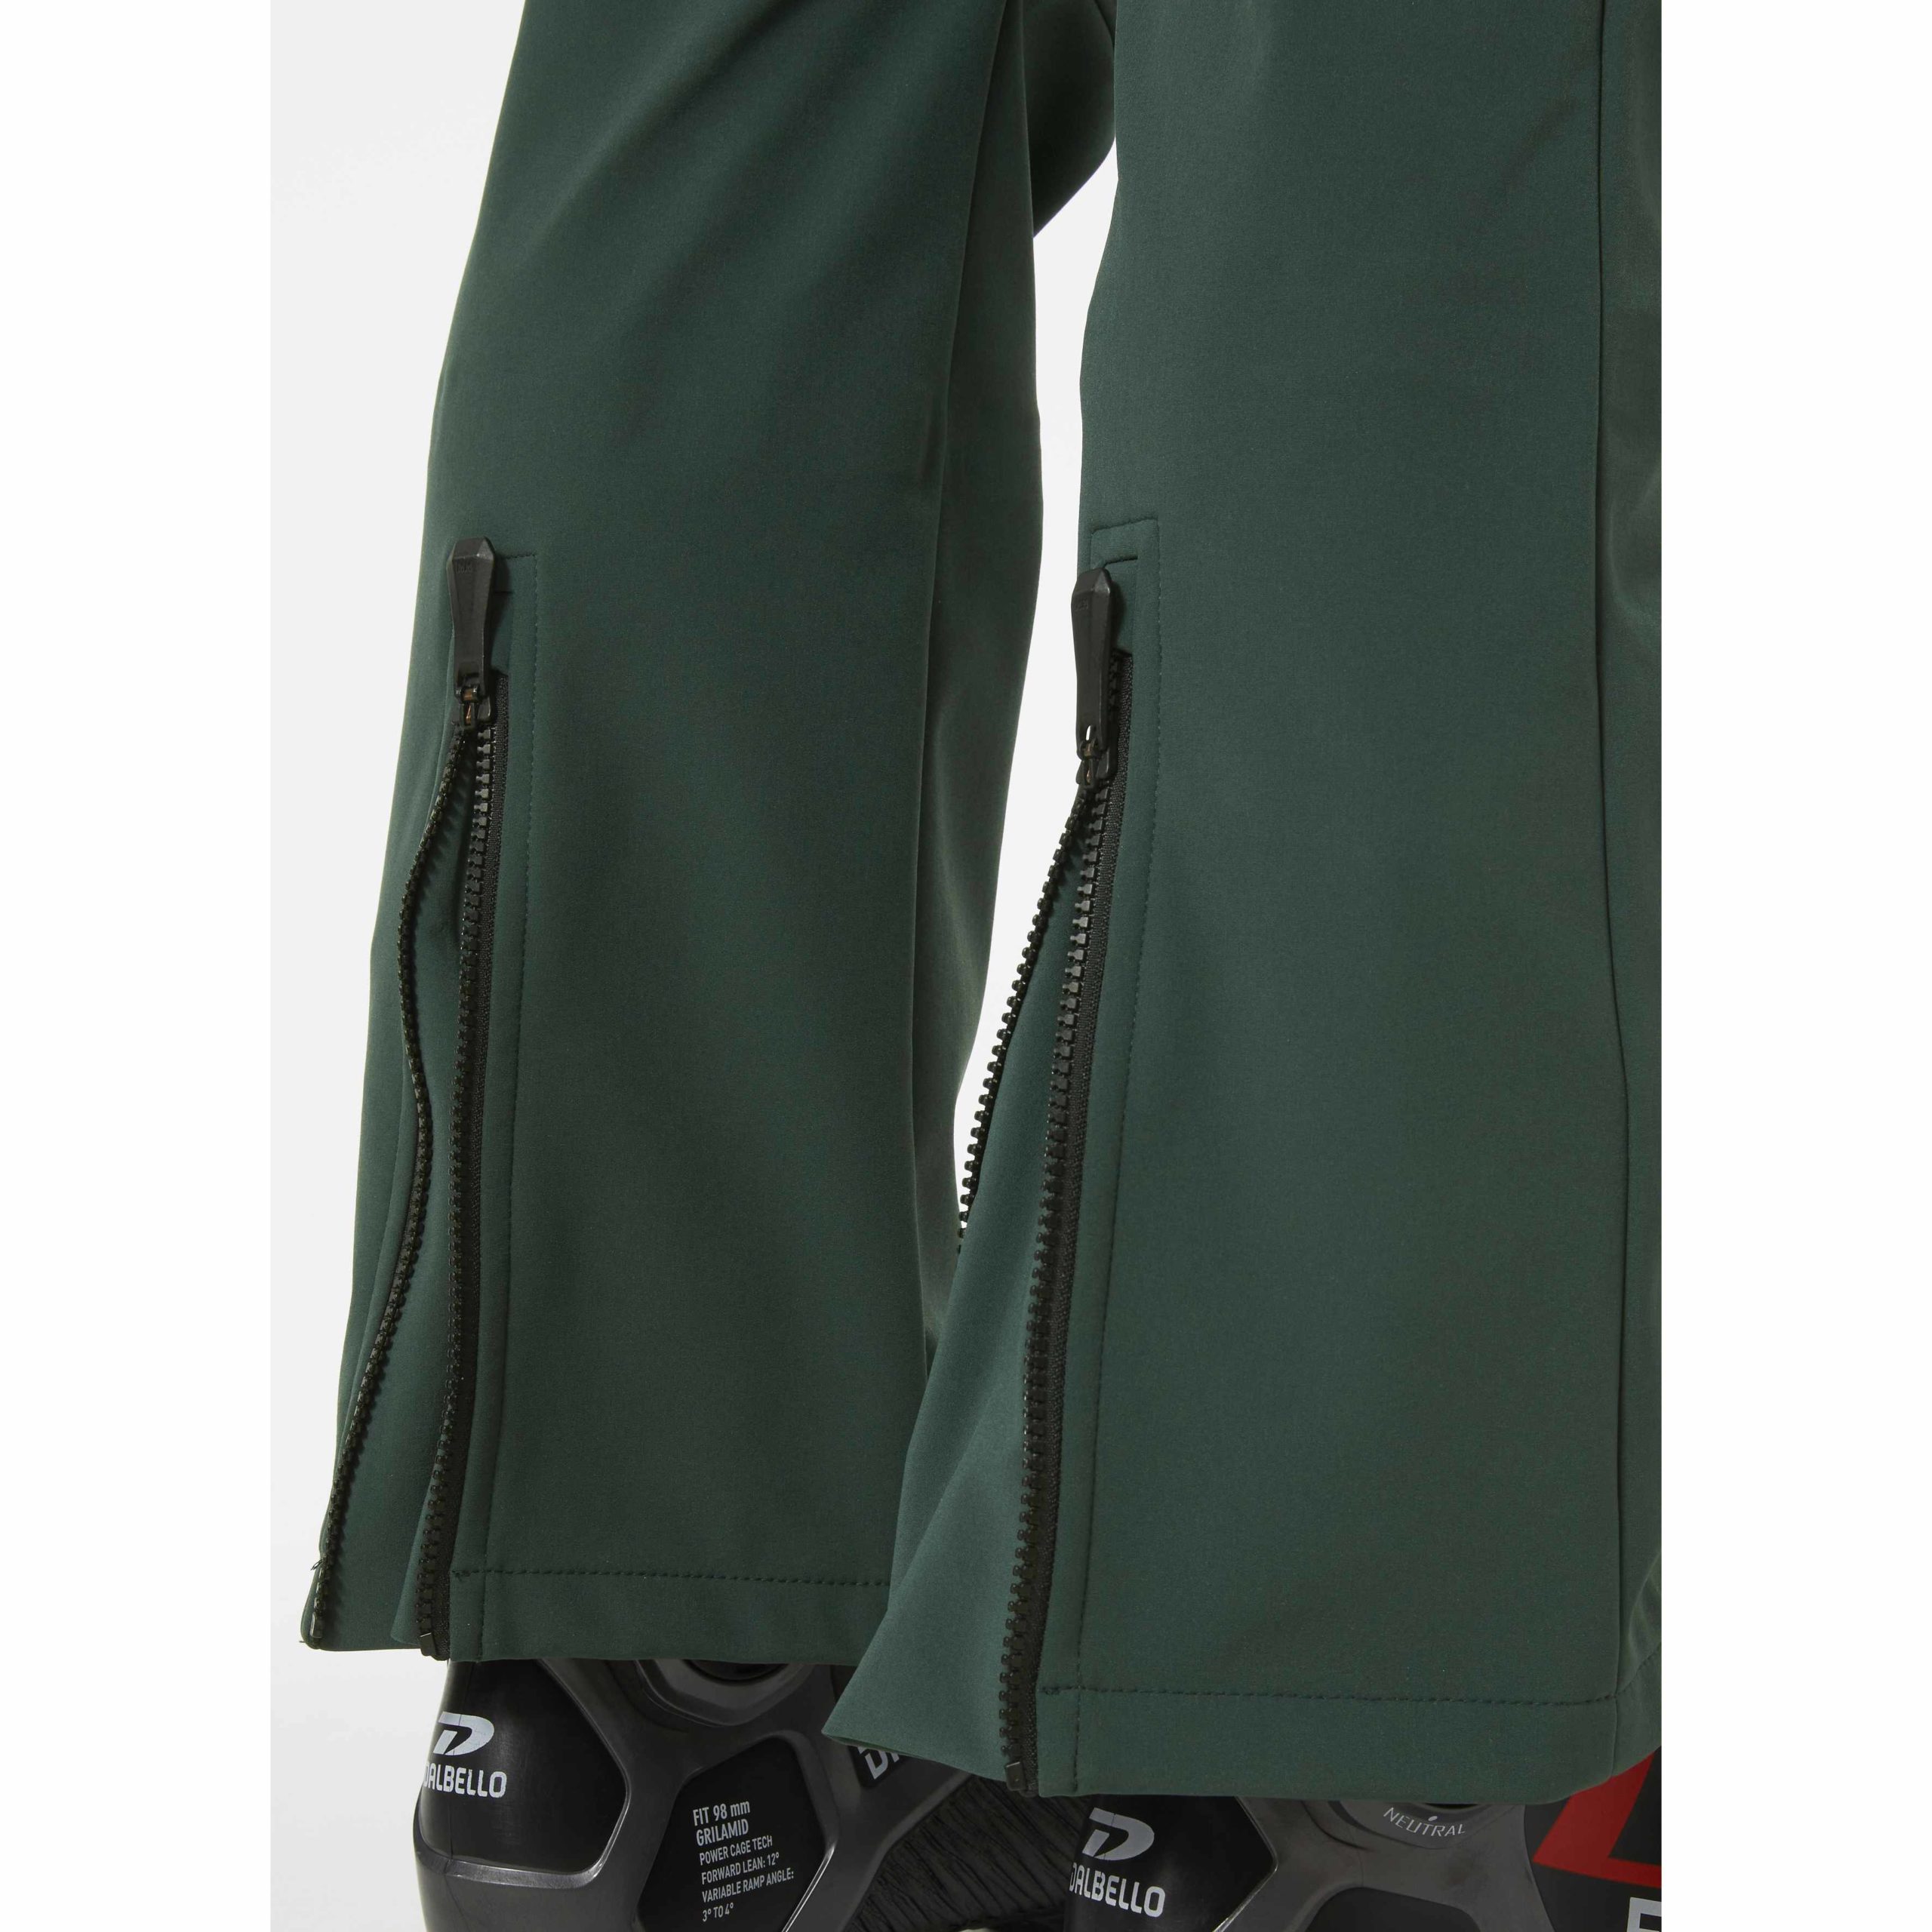 Helly Hansen Womens Bellissimo 2 Pant | Big Weather Gear | Helly